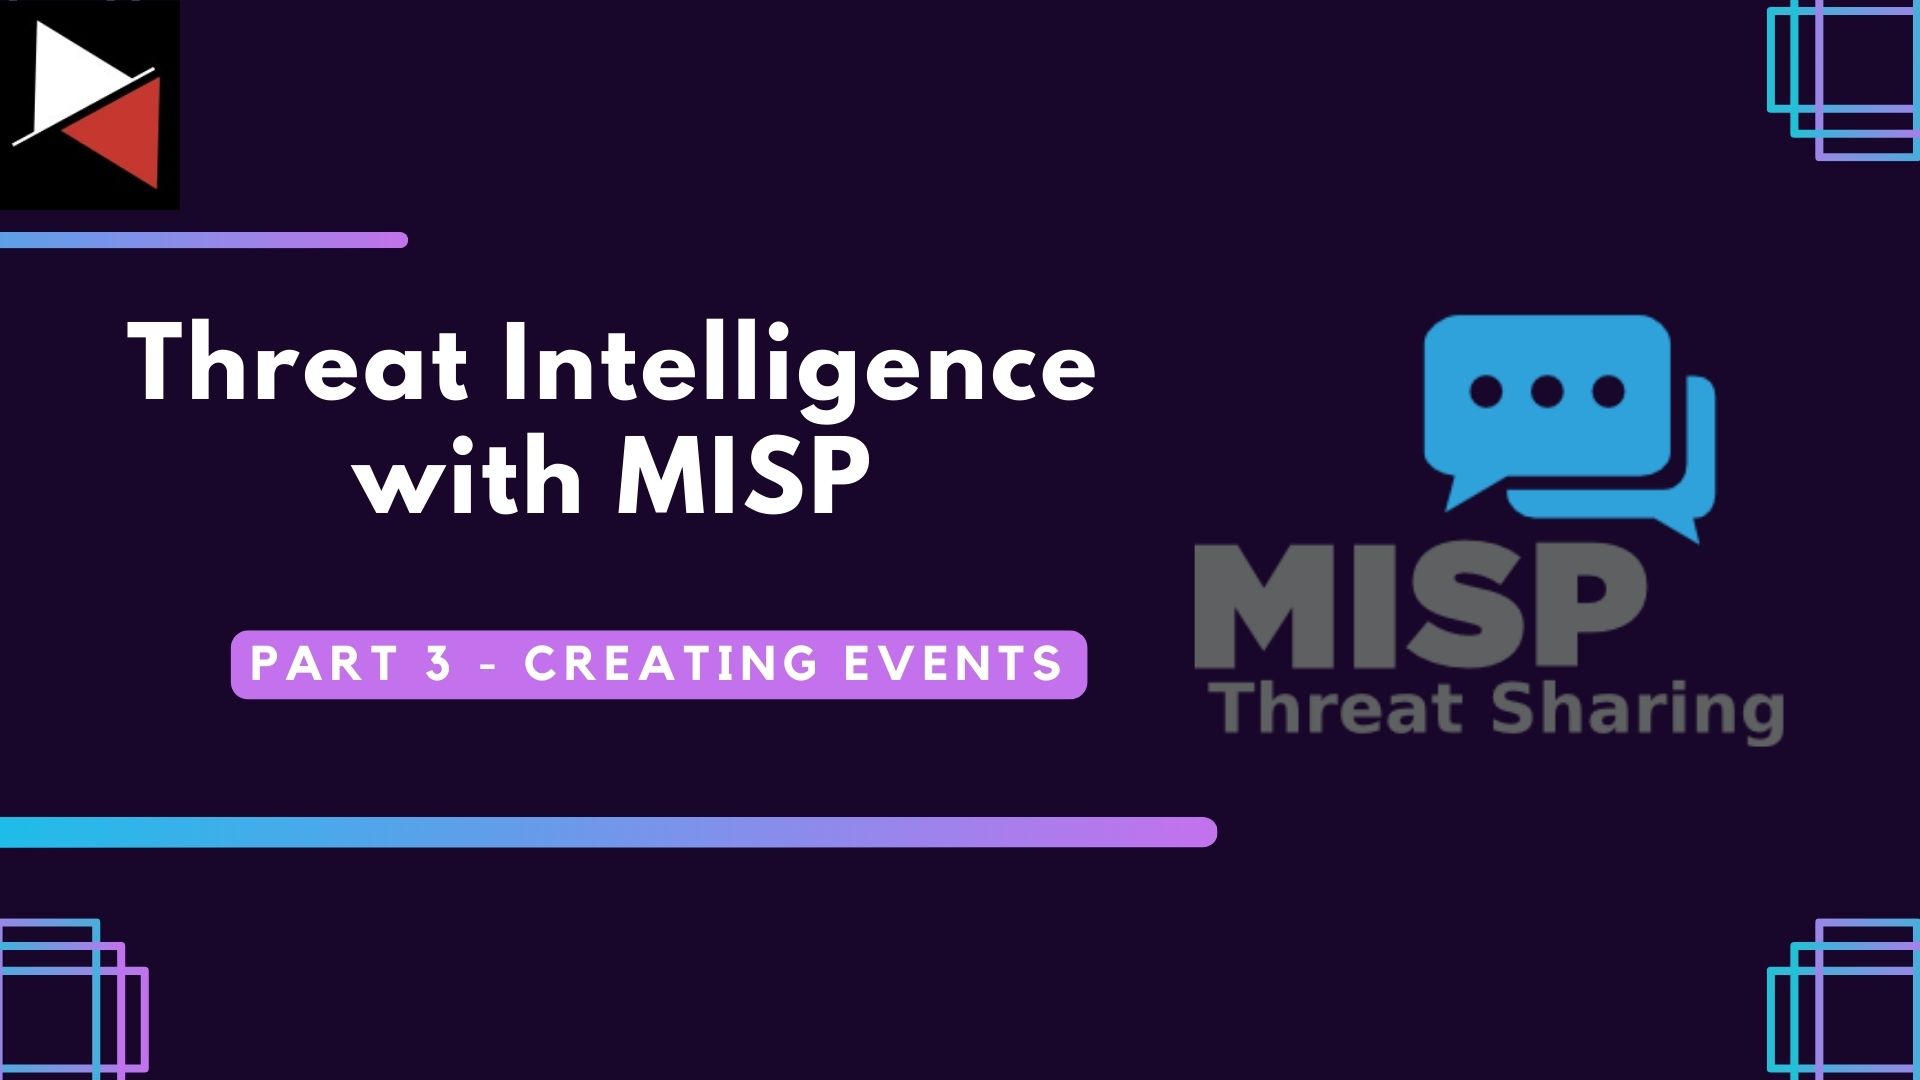 Threat Intelligence with MISP Part 3 - Creating Events